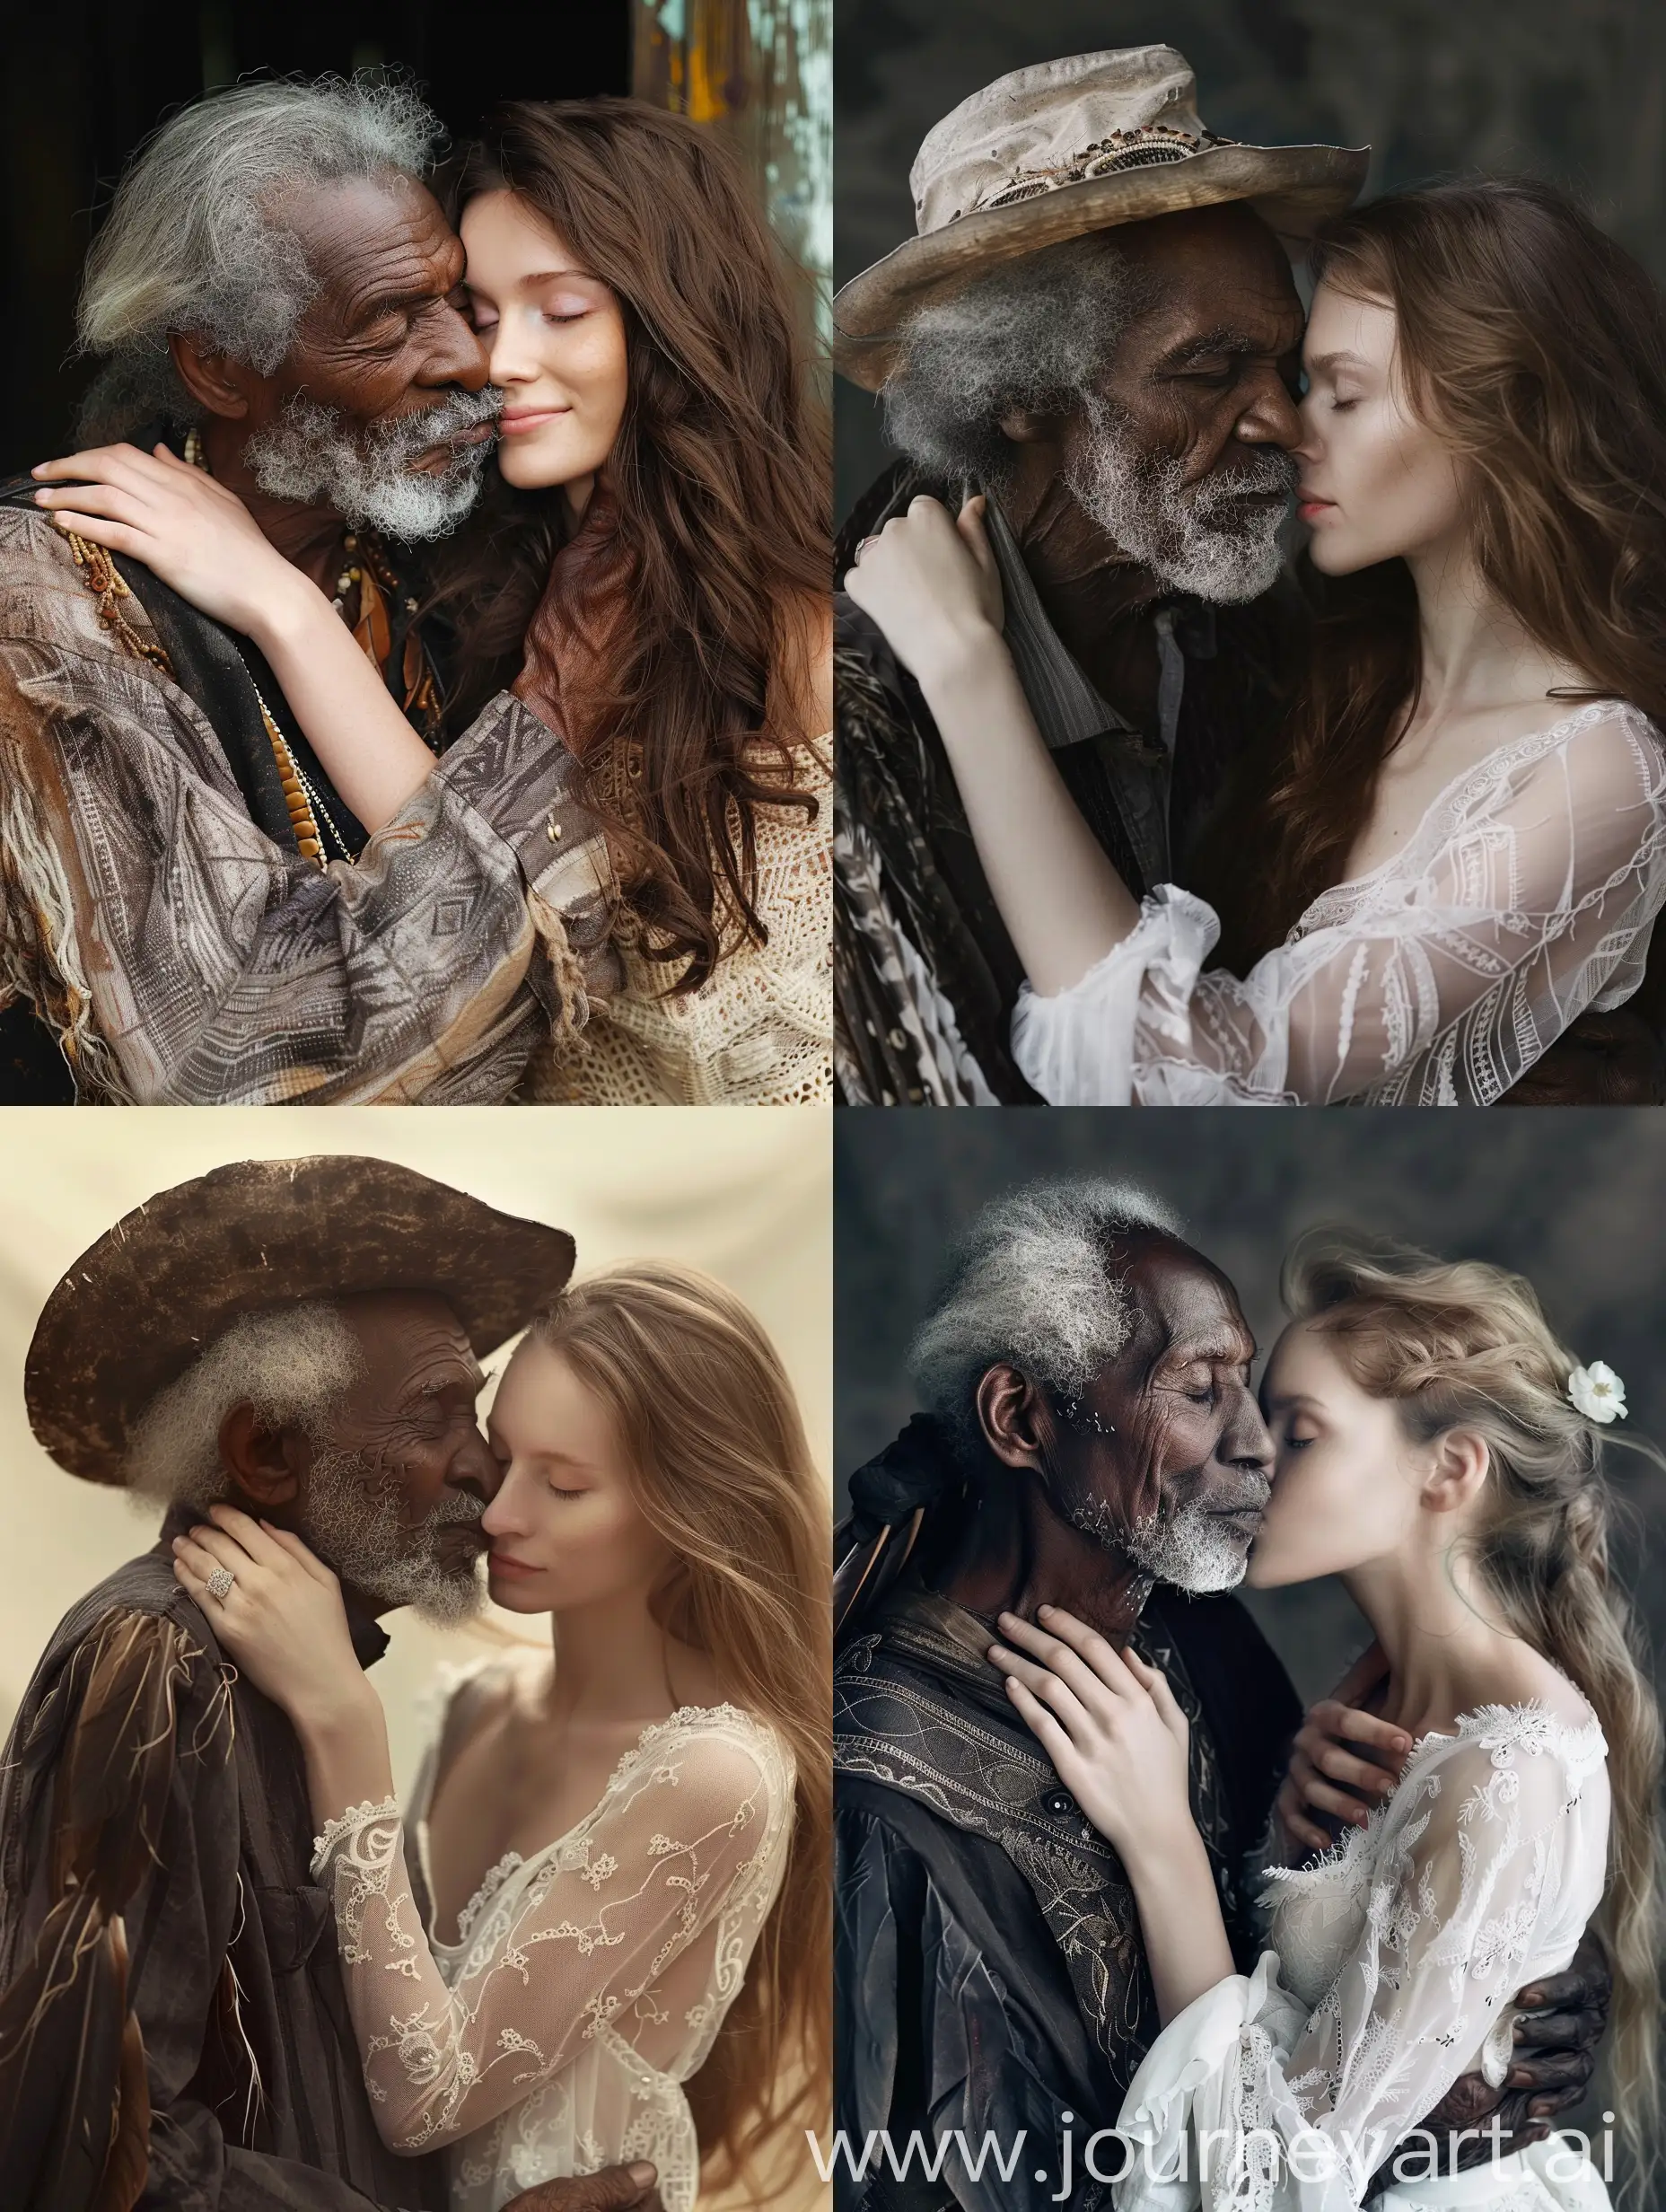 Interracial-Love-Affectionate-Kiss-Between-Elderly-Black-Man-and-Young-White-Woman